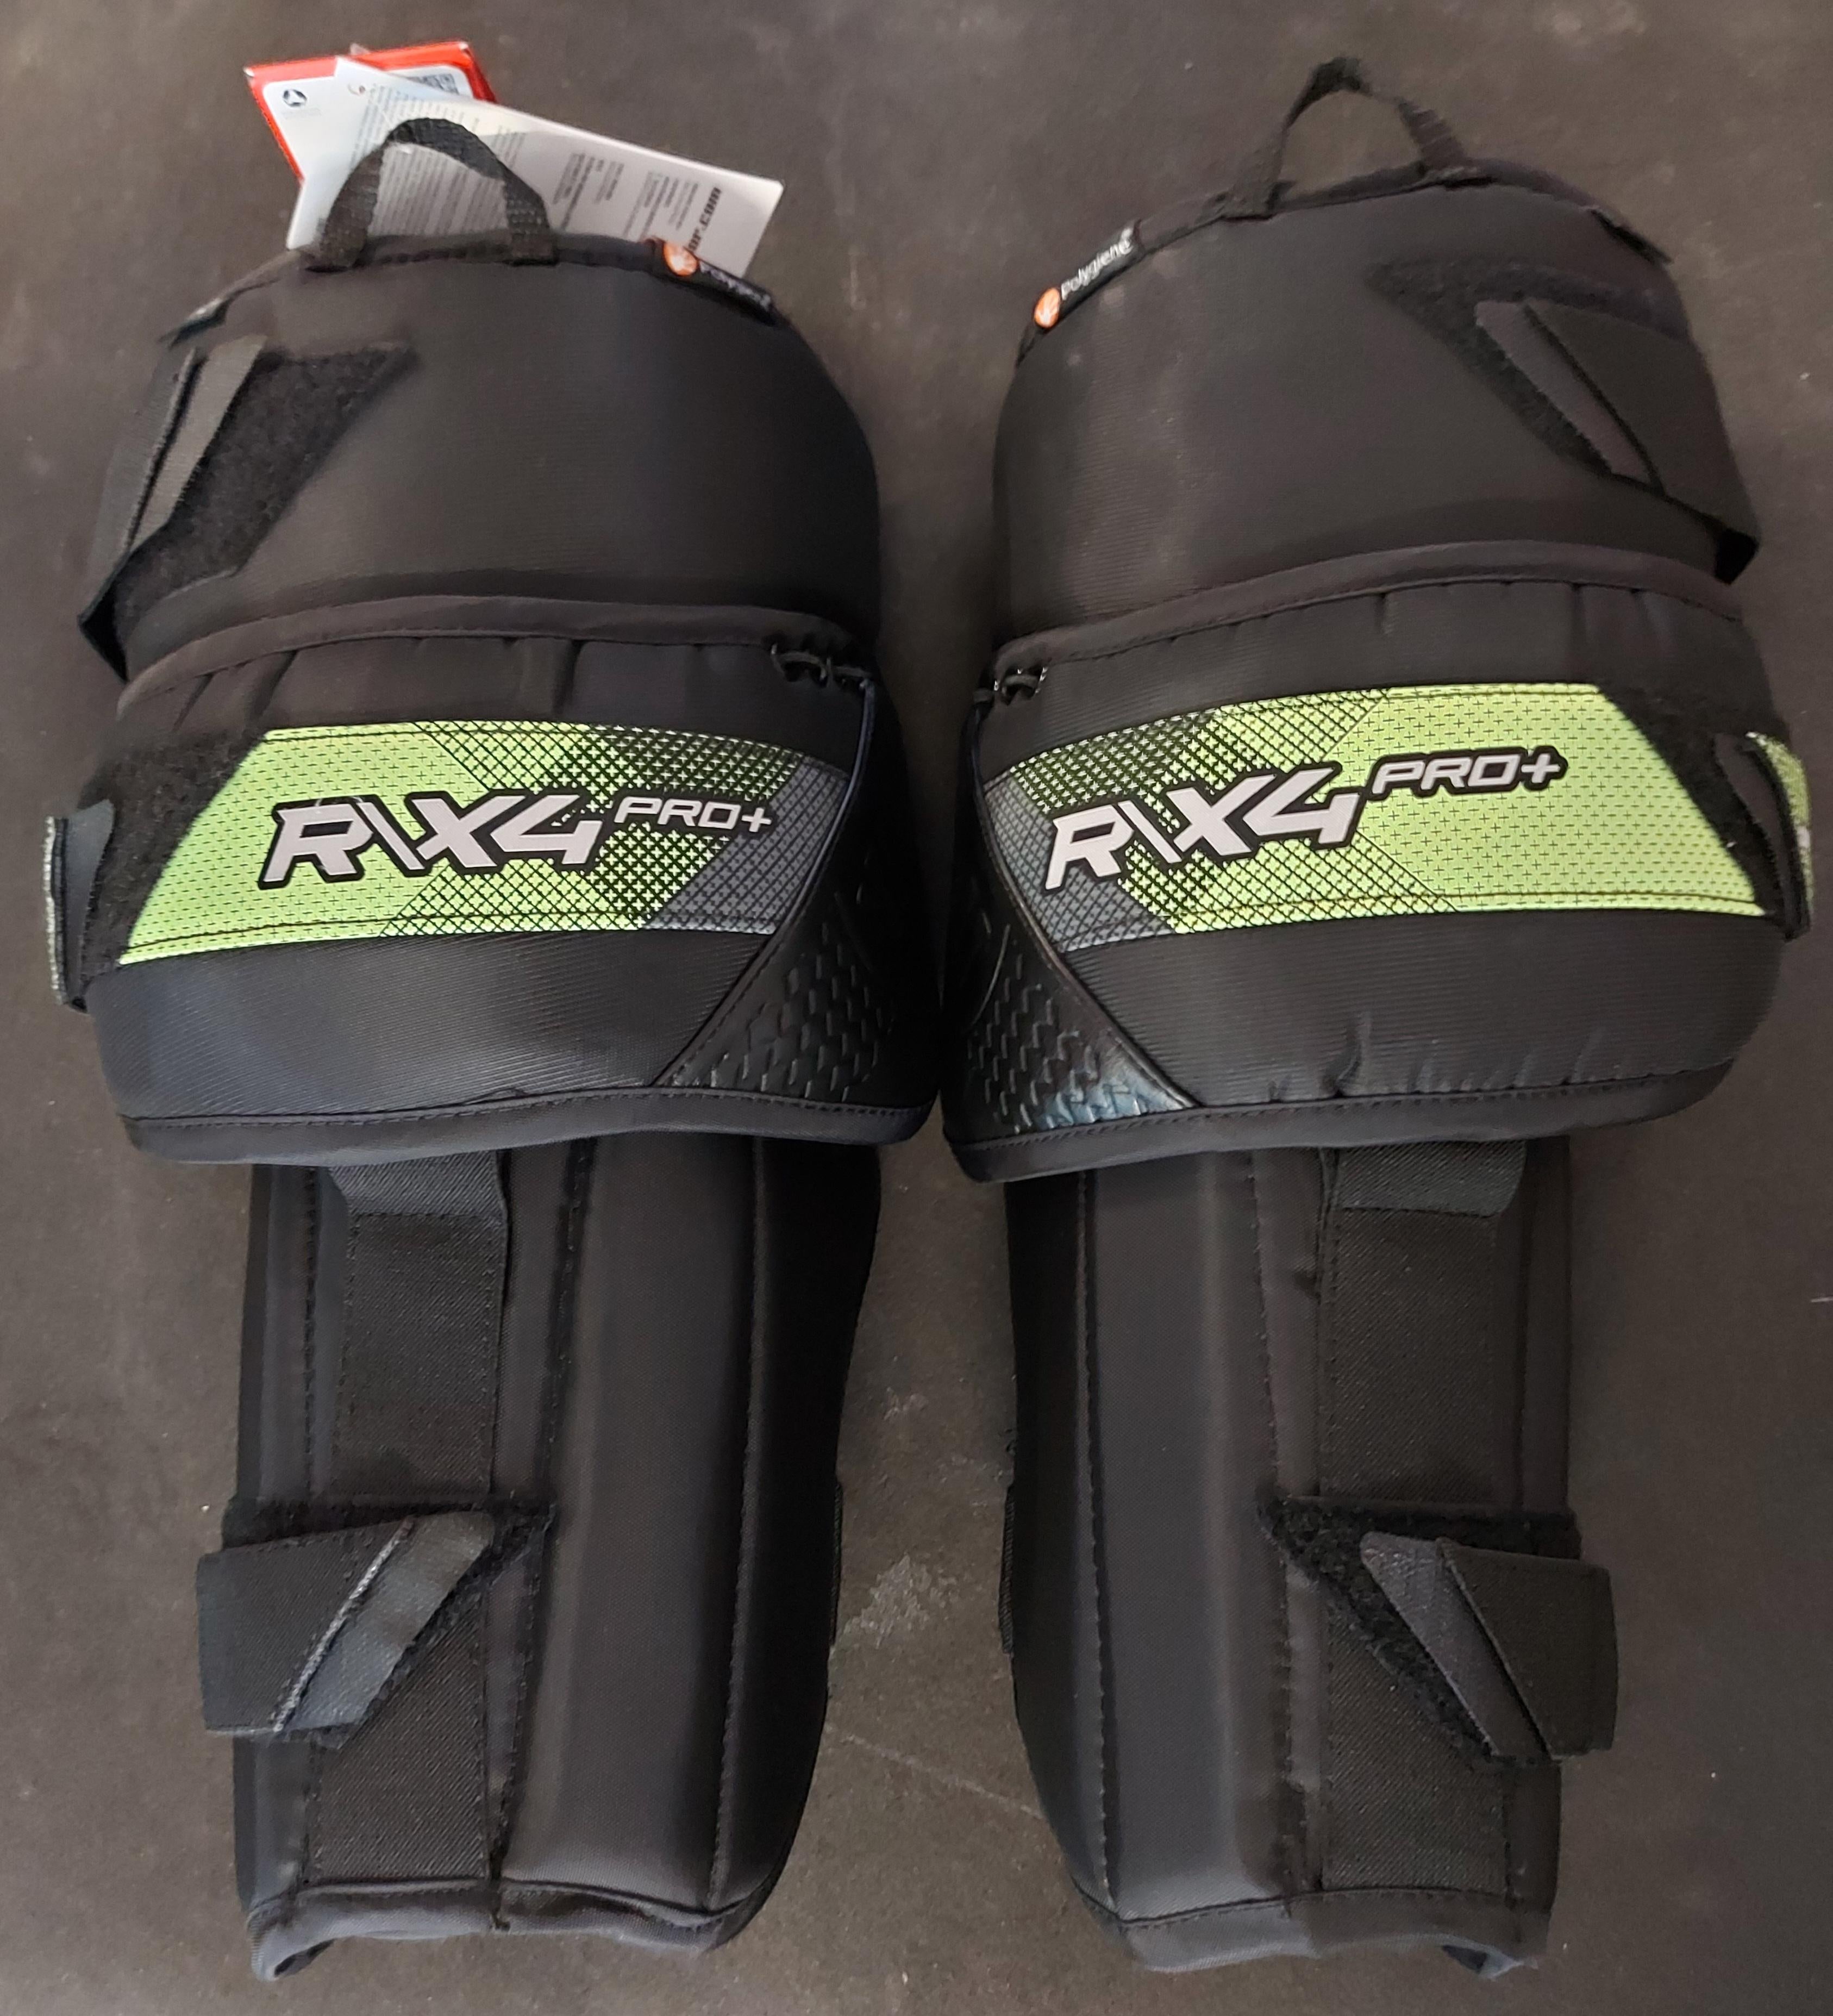 Warrior X2 Pro+ Knee Pad Review 